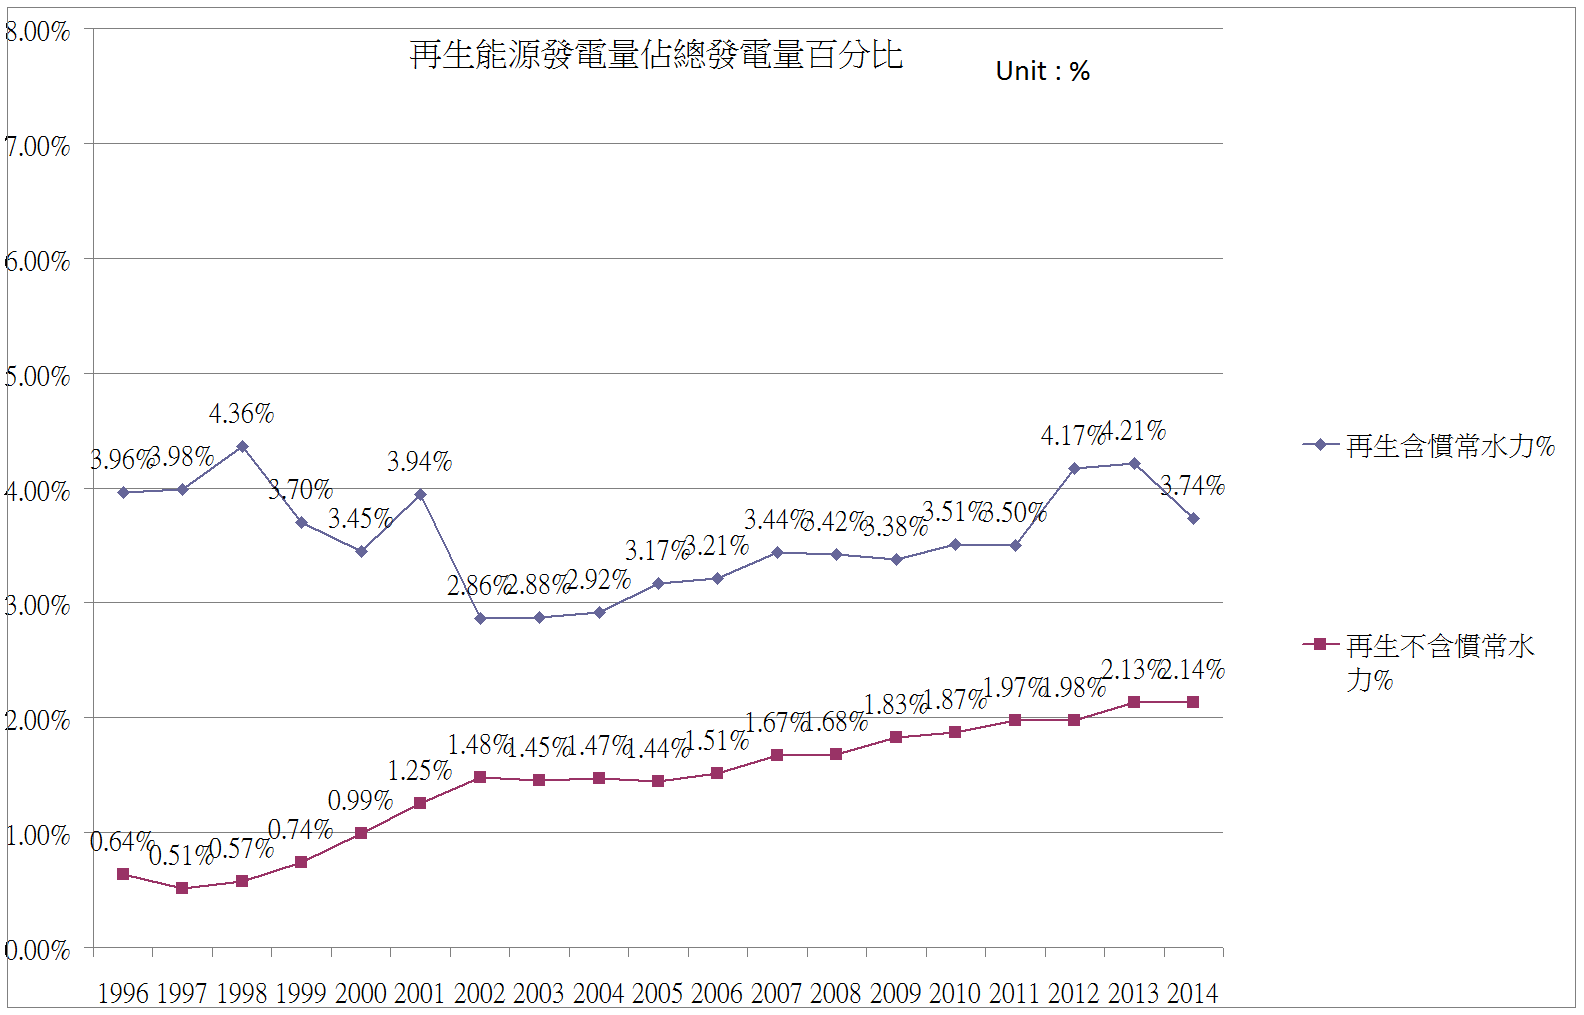 the problem of taiwan energy transform 2 2